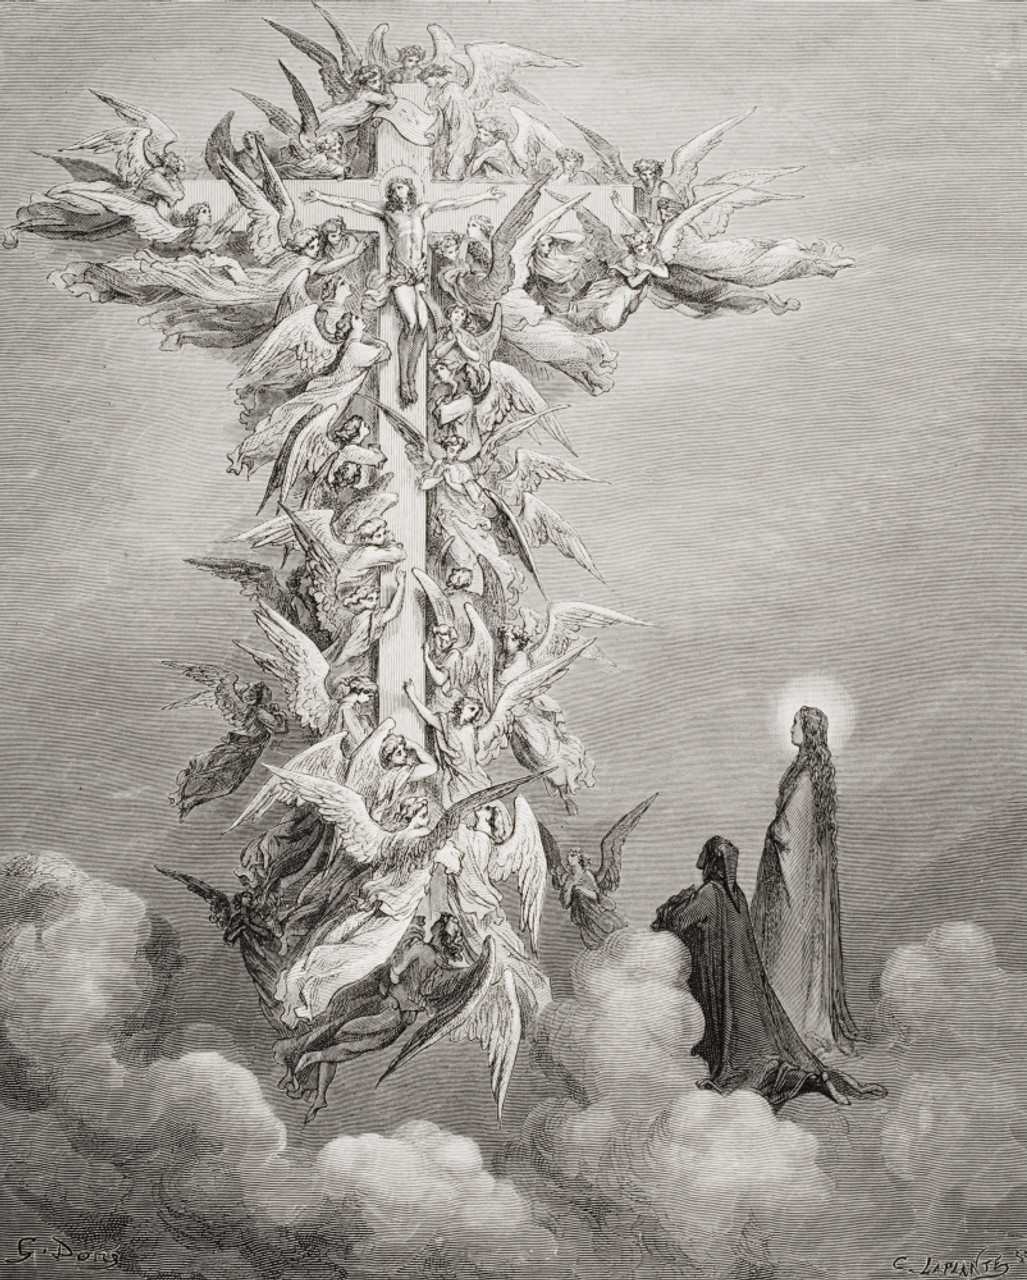 The Paris Review - Recapping Dante: Canto 3, or Abandon Hope - The